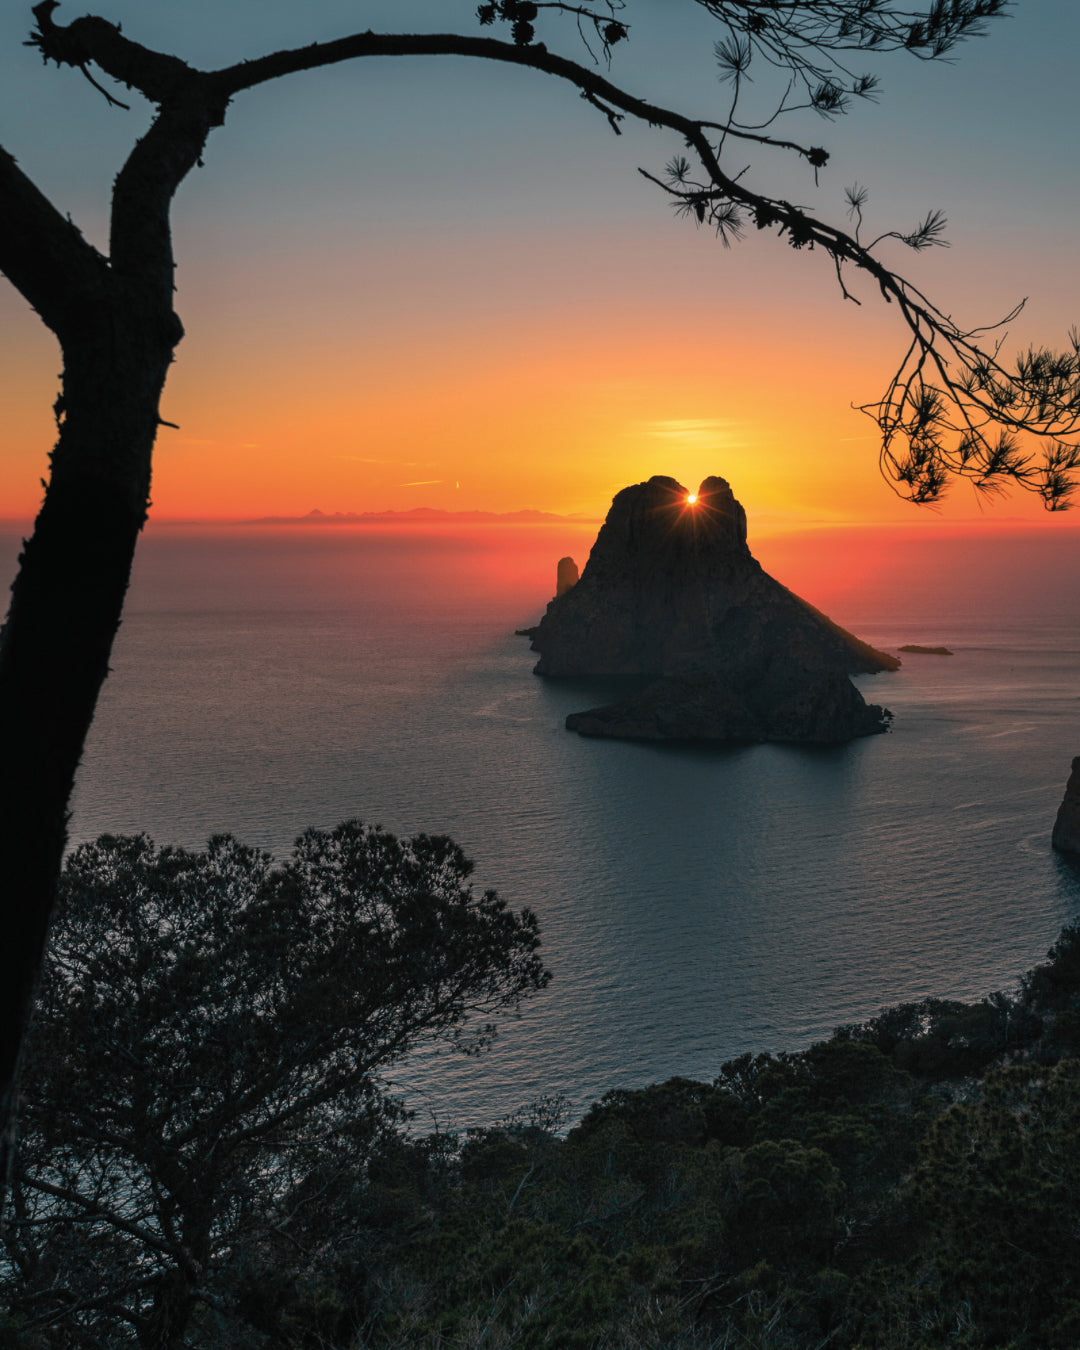 Embark on an Unforgettable Journey: Taking a Sunset Cliff Walk in Ibiza